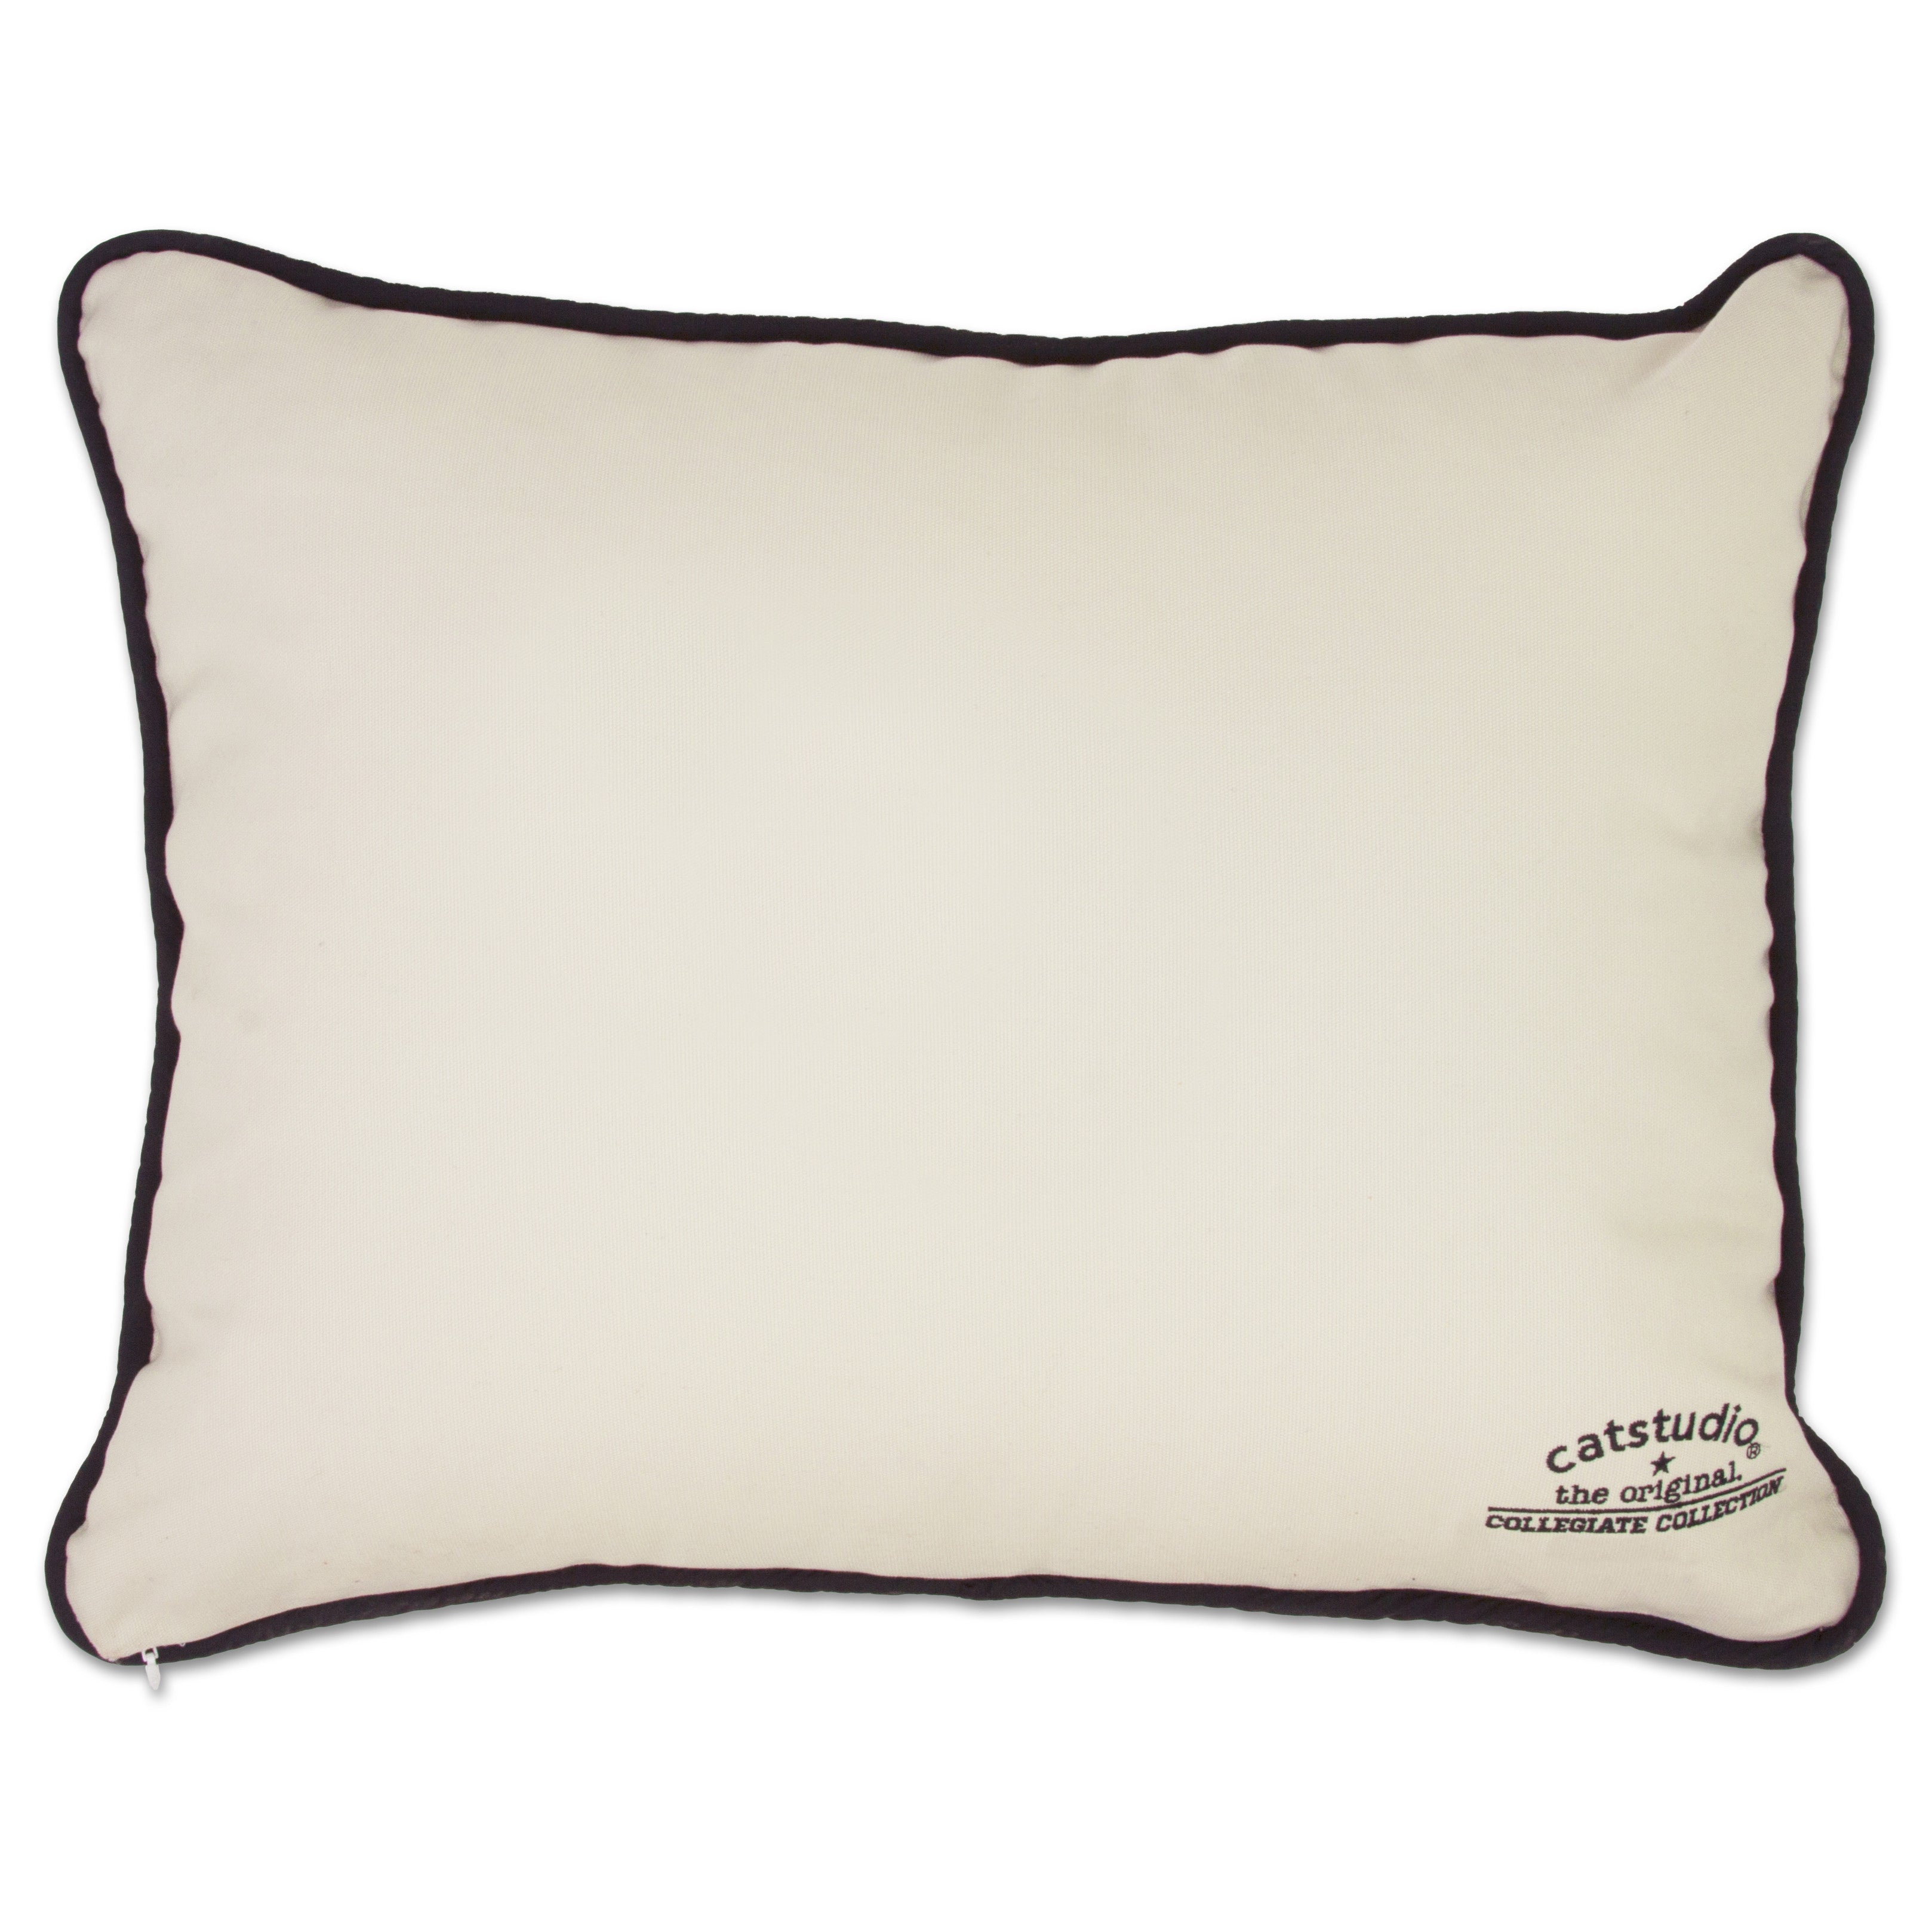 Penn State University Collegiate Embroidered Pillow